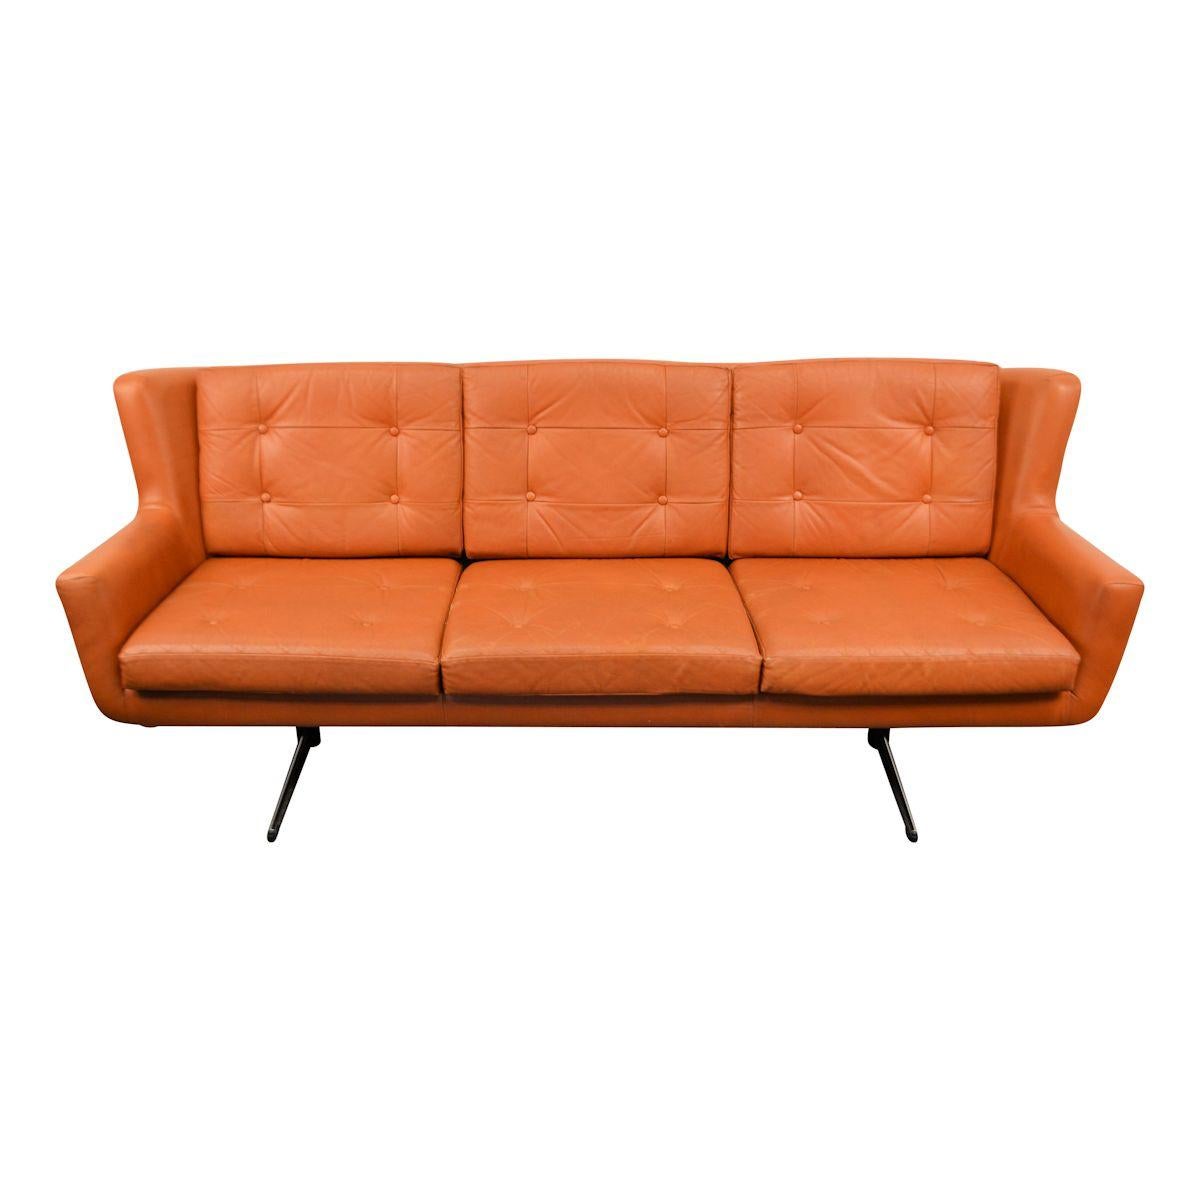 Gorgeous vintage leather three-seat sofa designed and manufactured by Danish maker Skjold Sørensen. This brown leather sofa features a metal base, offers a great level of comfort and padded cushions. A high quality Danish design piece that make a